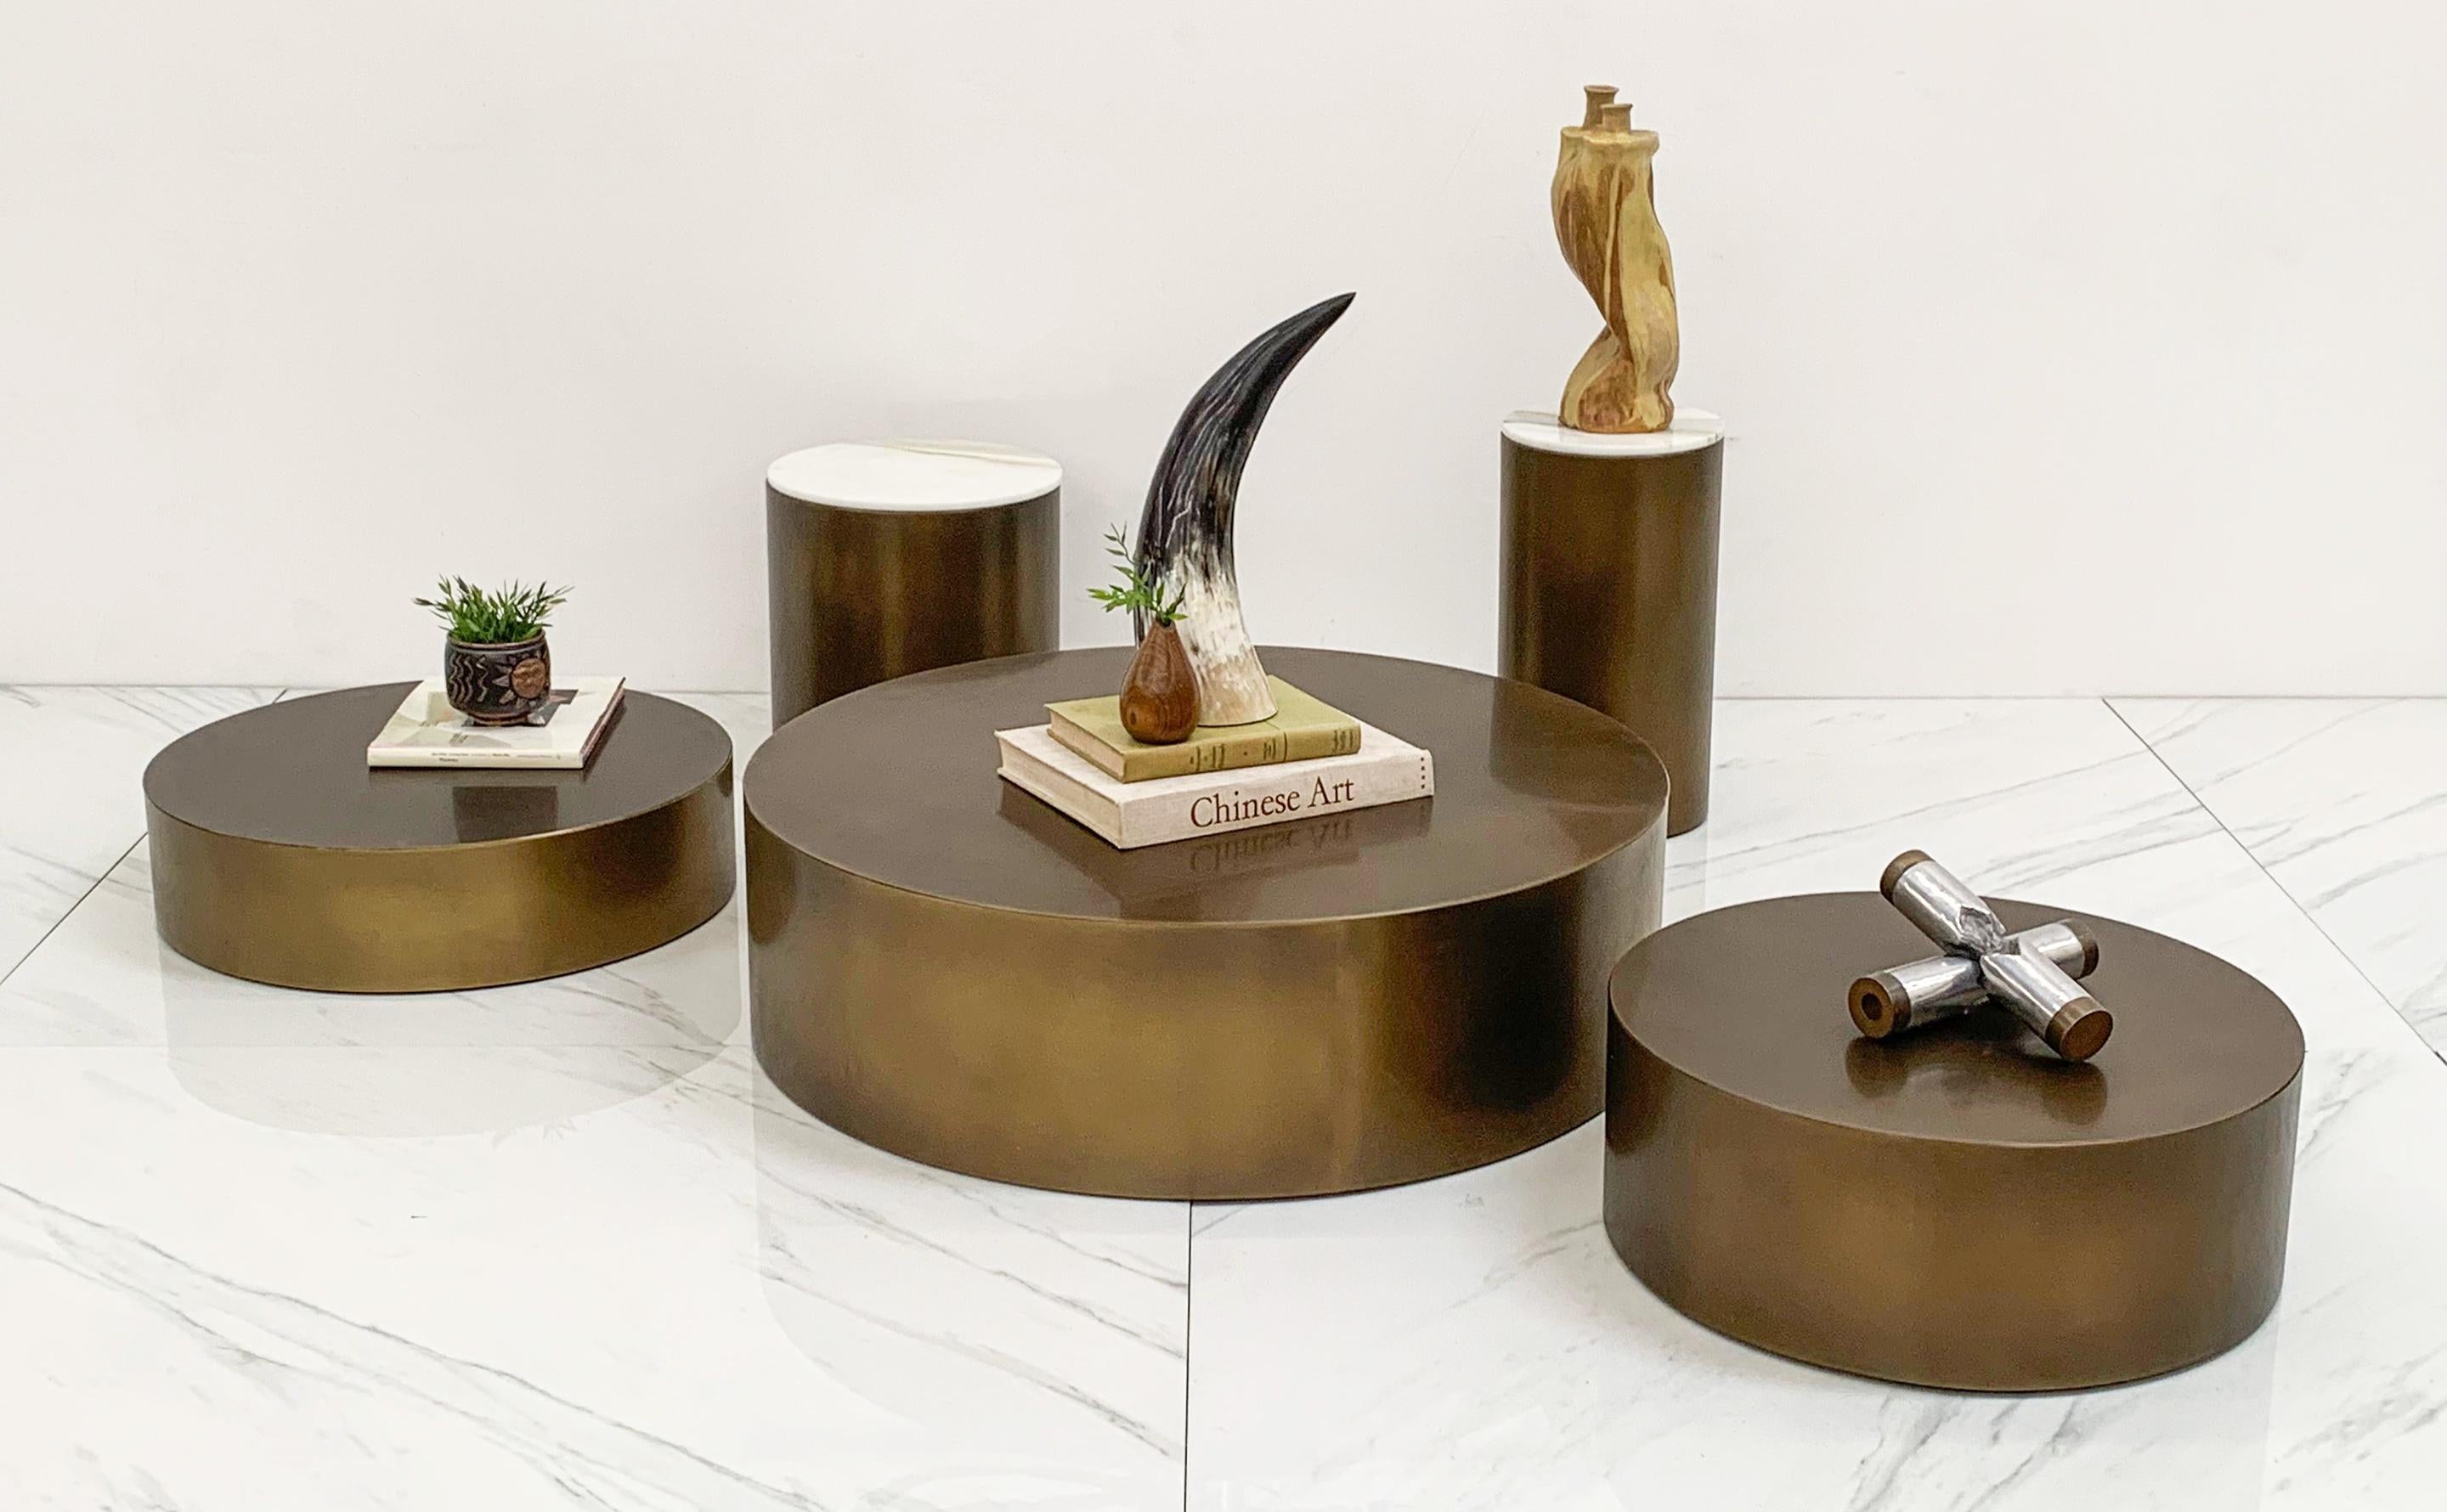 Mushroom City, Coffee Table and Side Table Groupings, Bronze, Videre Licet, 2015 4